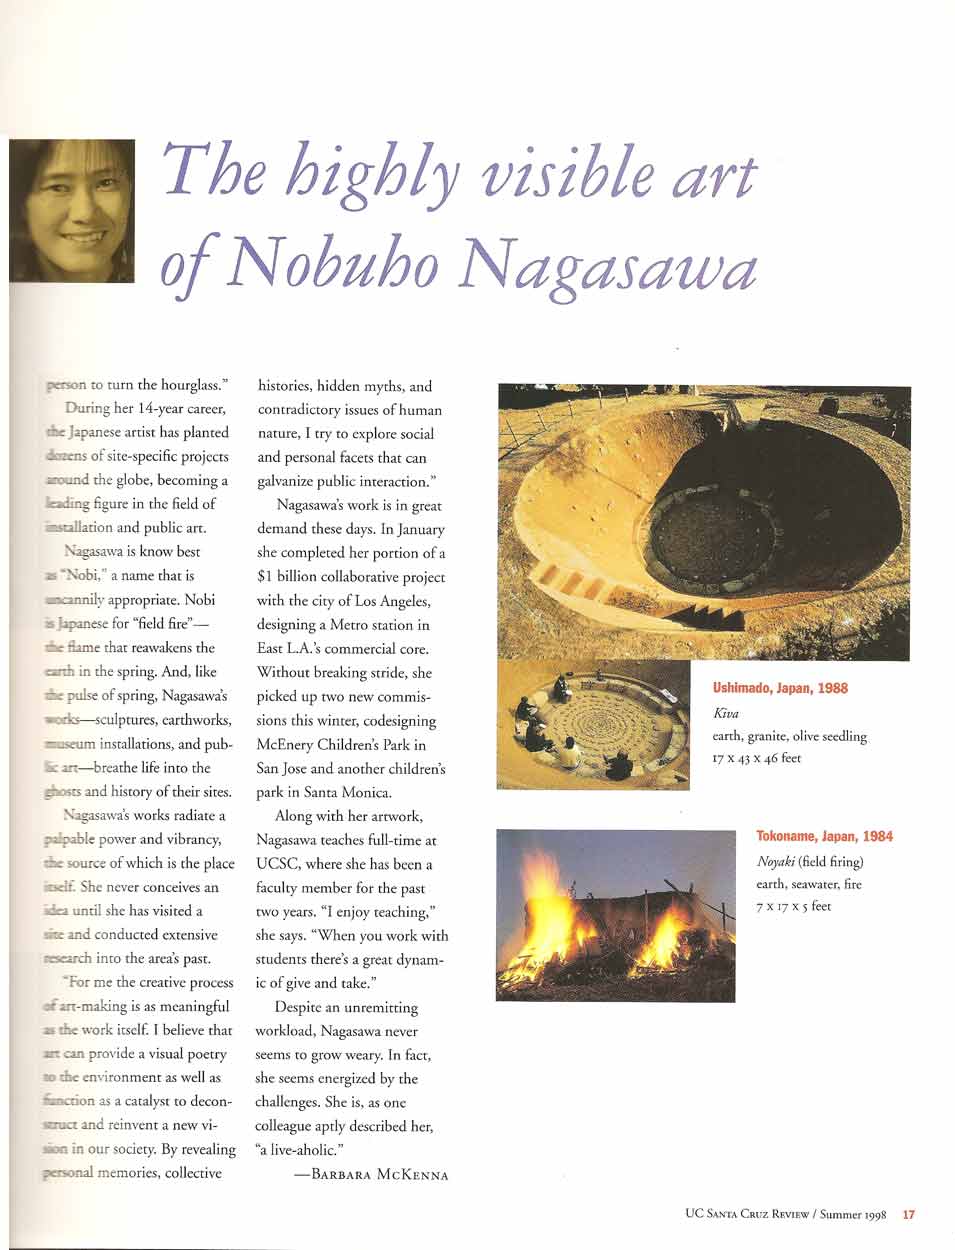 Site Specific: The Highly Visibe Art of Nobuho Nagasawa: pg 2